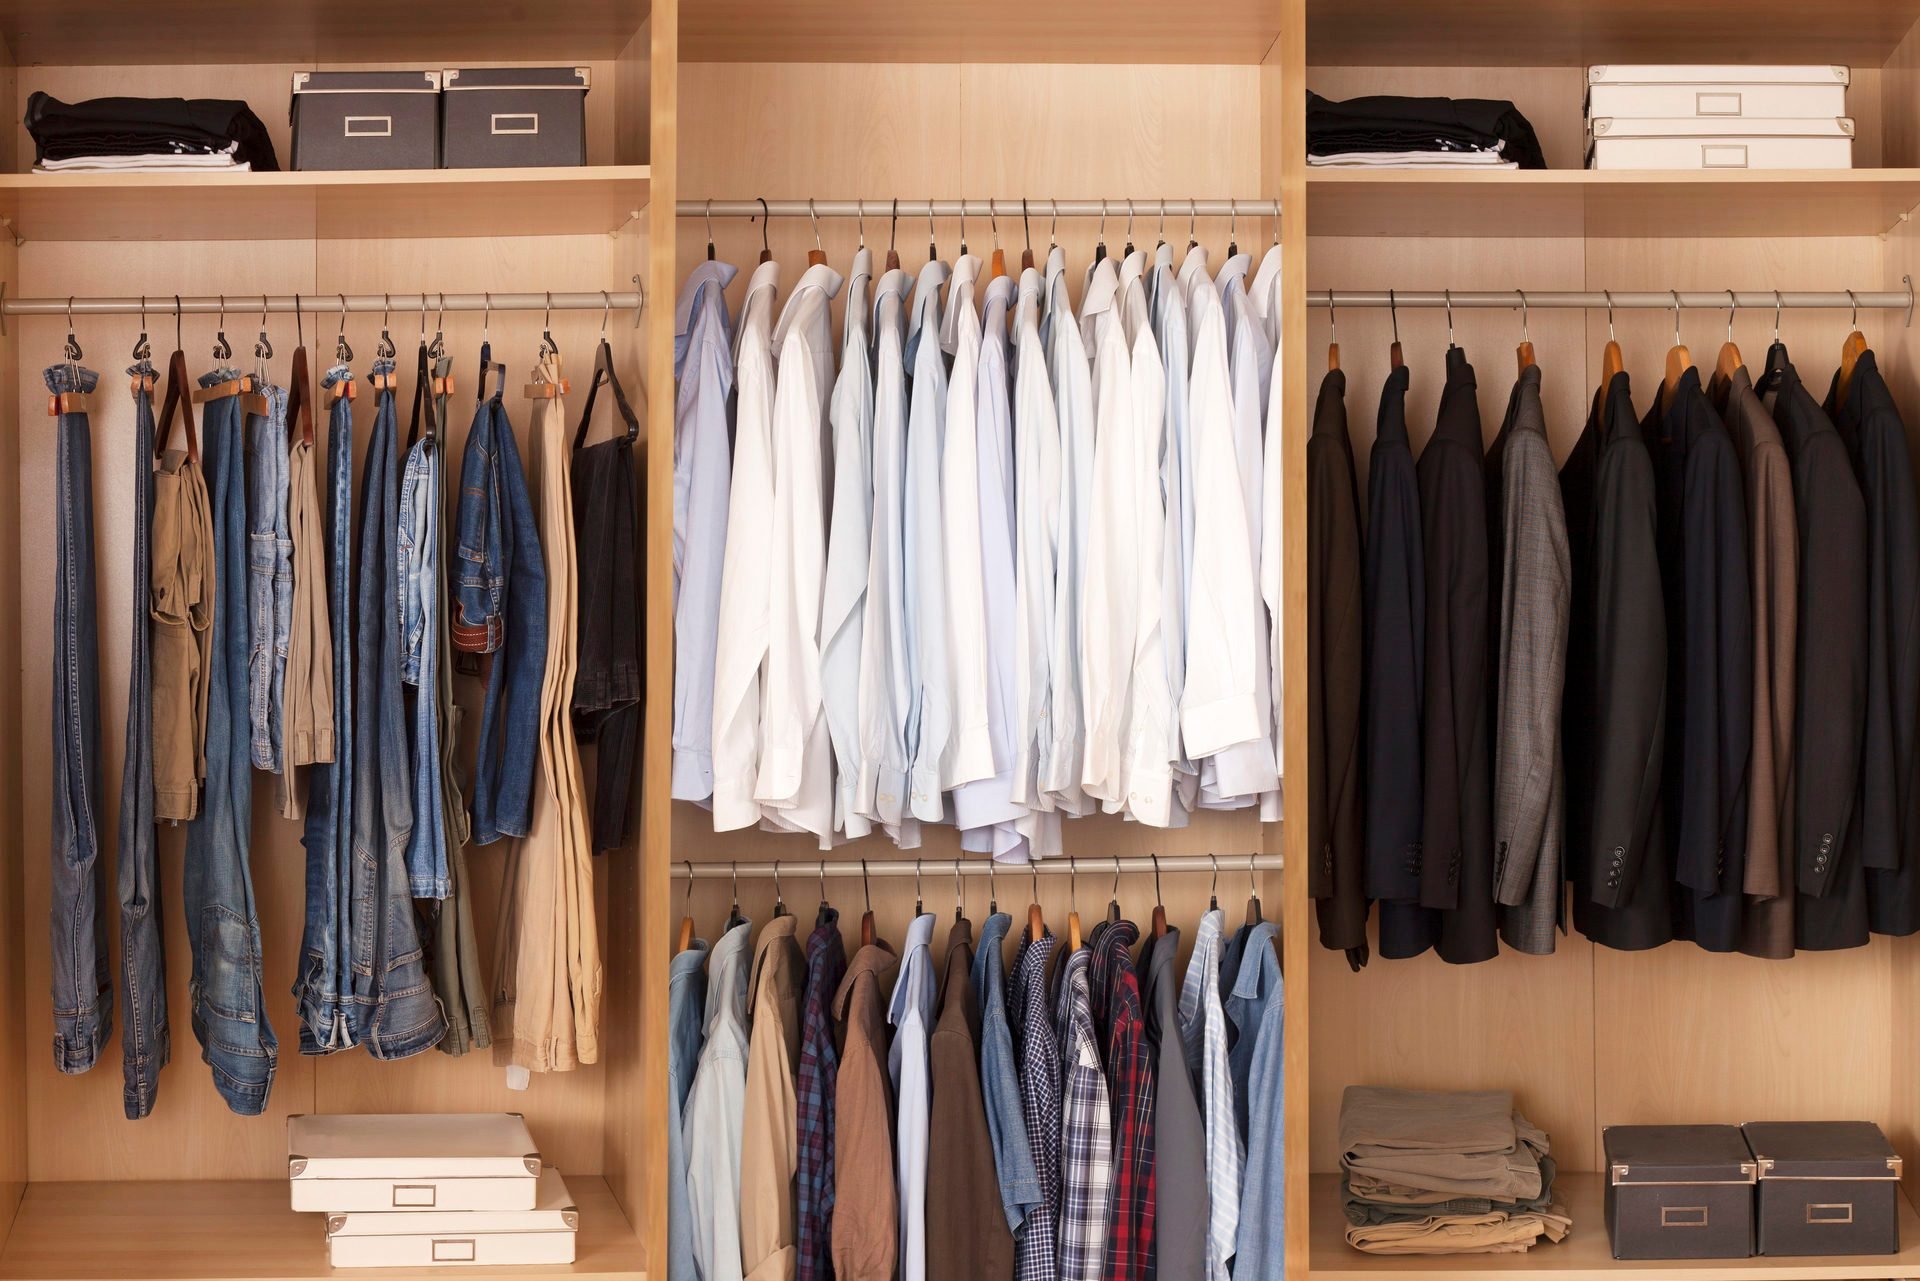 How a Professional Organizer Would Transform Your Closet | Reader's Digest